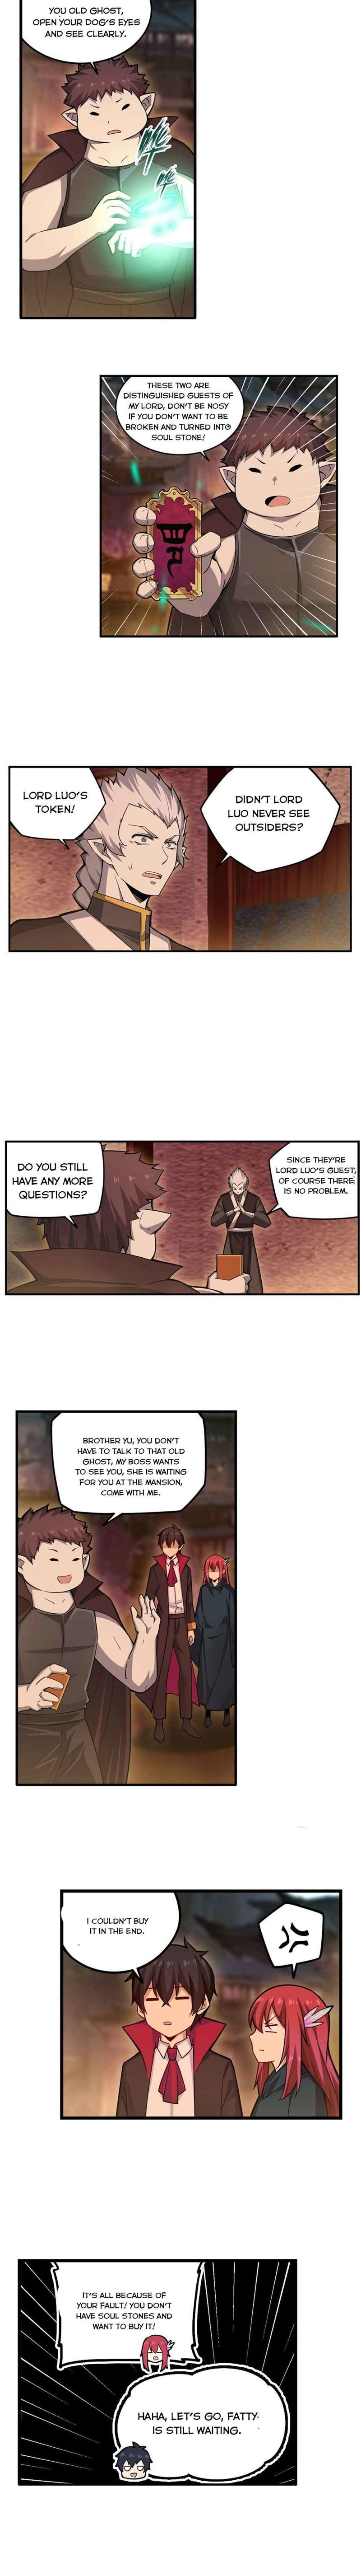 Infinite Apostles and Twelve War Girls Chapter 193 page 2